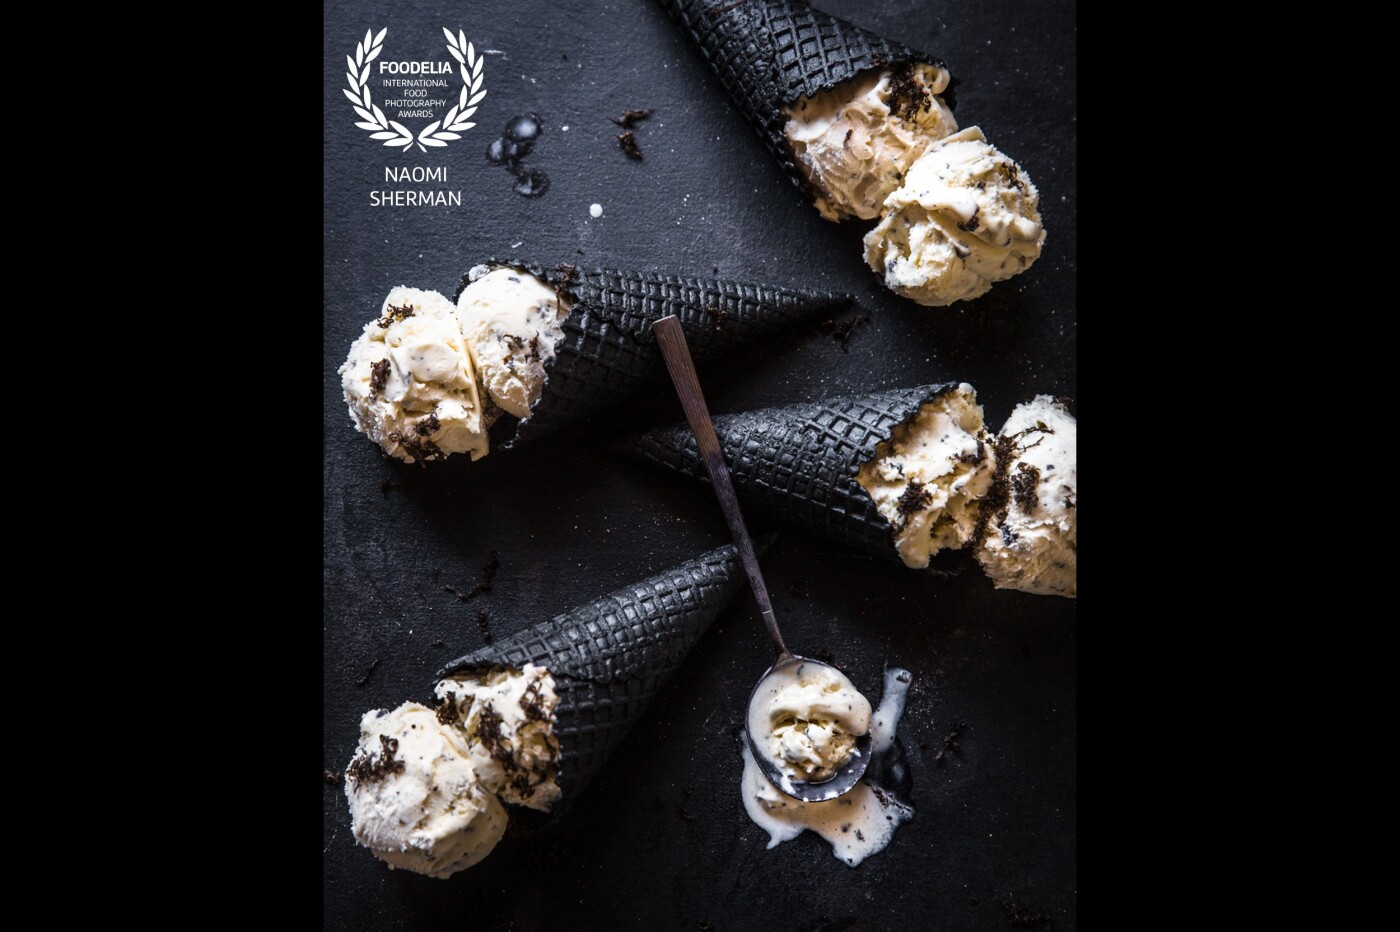 Truffle and Cardamom Ice Cream.<br />
Created and shot for a local truffle supplier, this delicious ice cream is shot in my studio, using natural light.<br />
I'm so impressed by the textures and tones of this image.